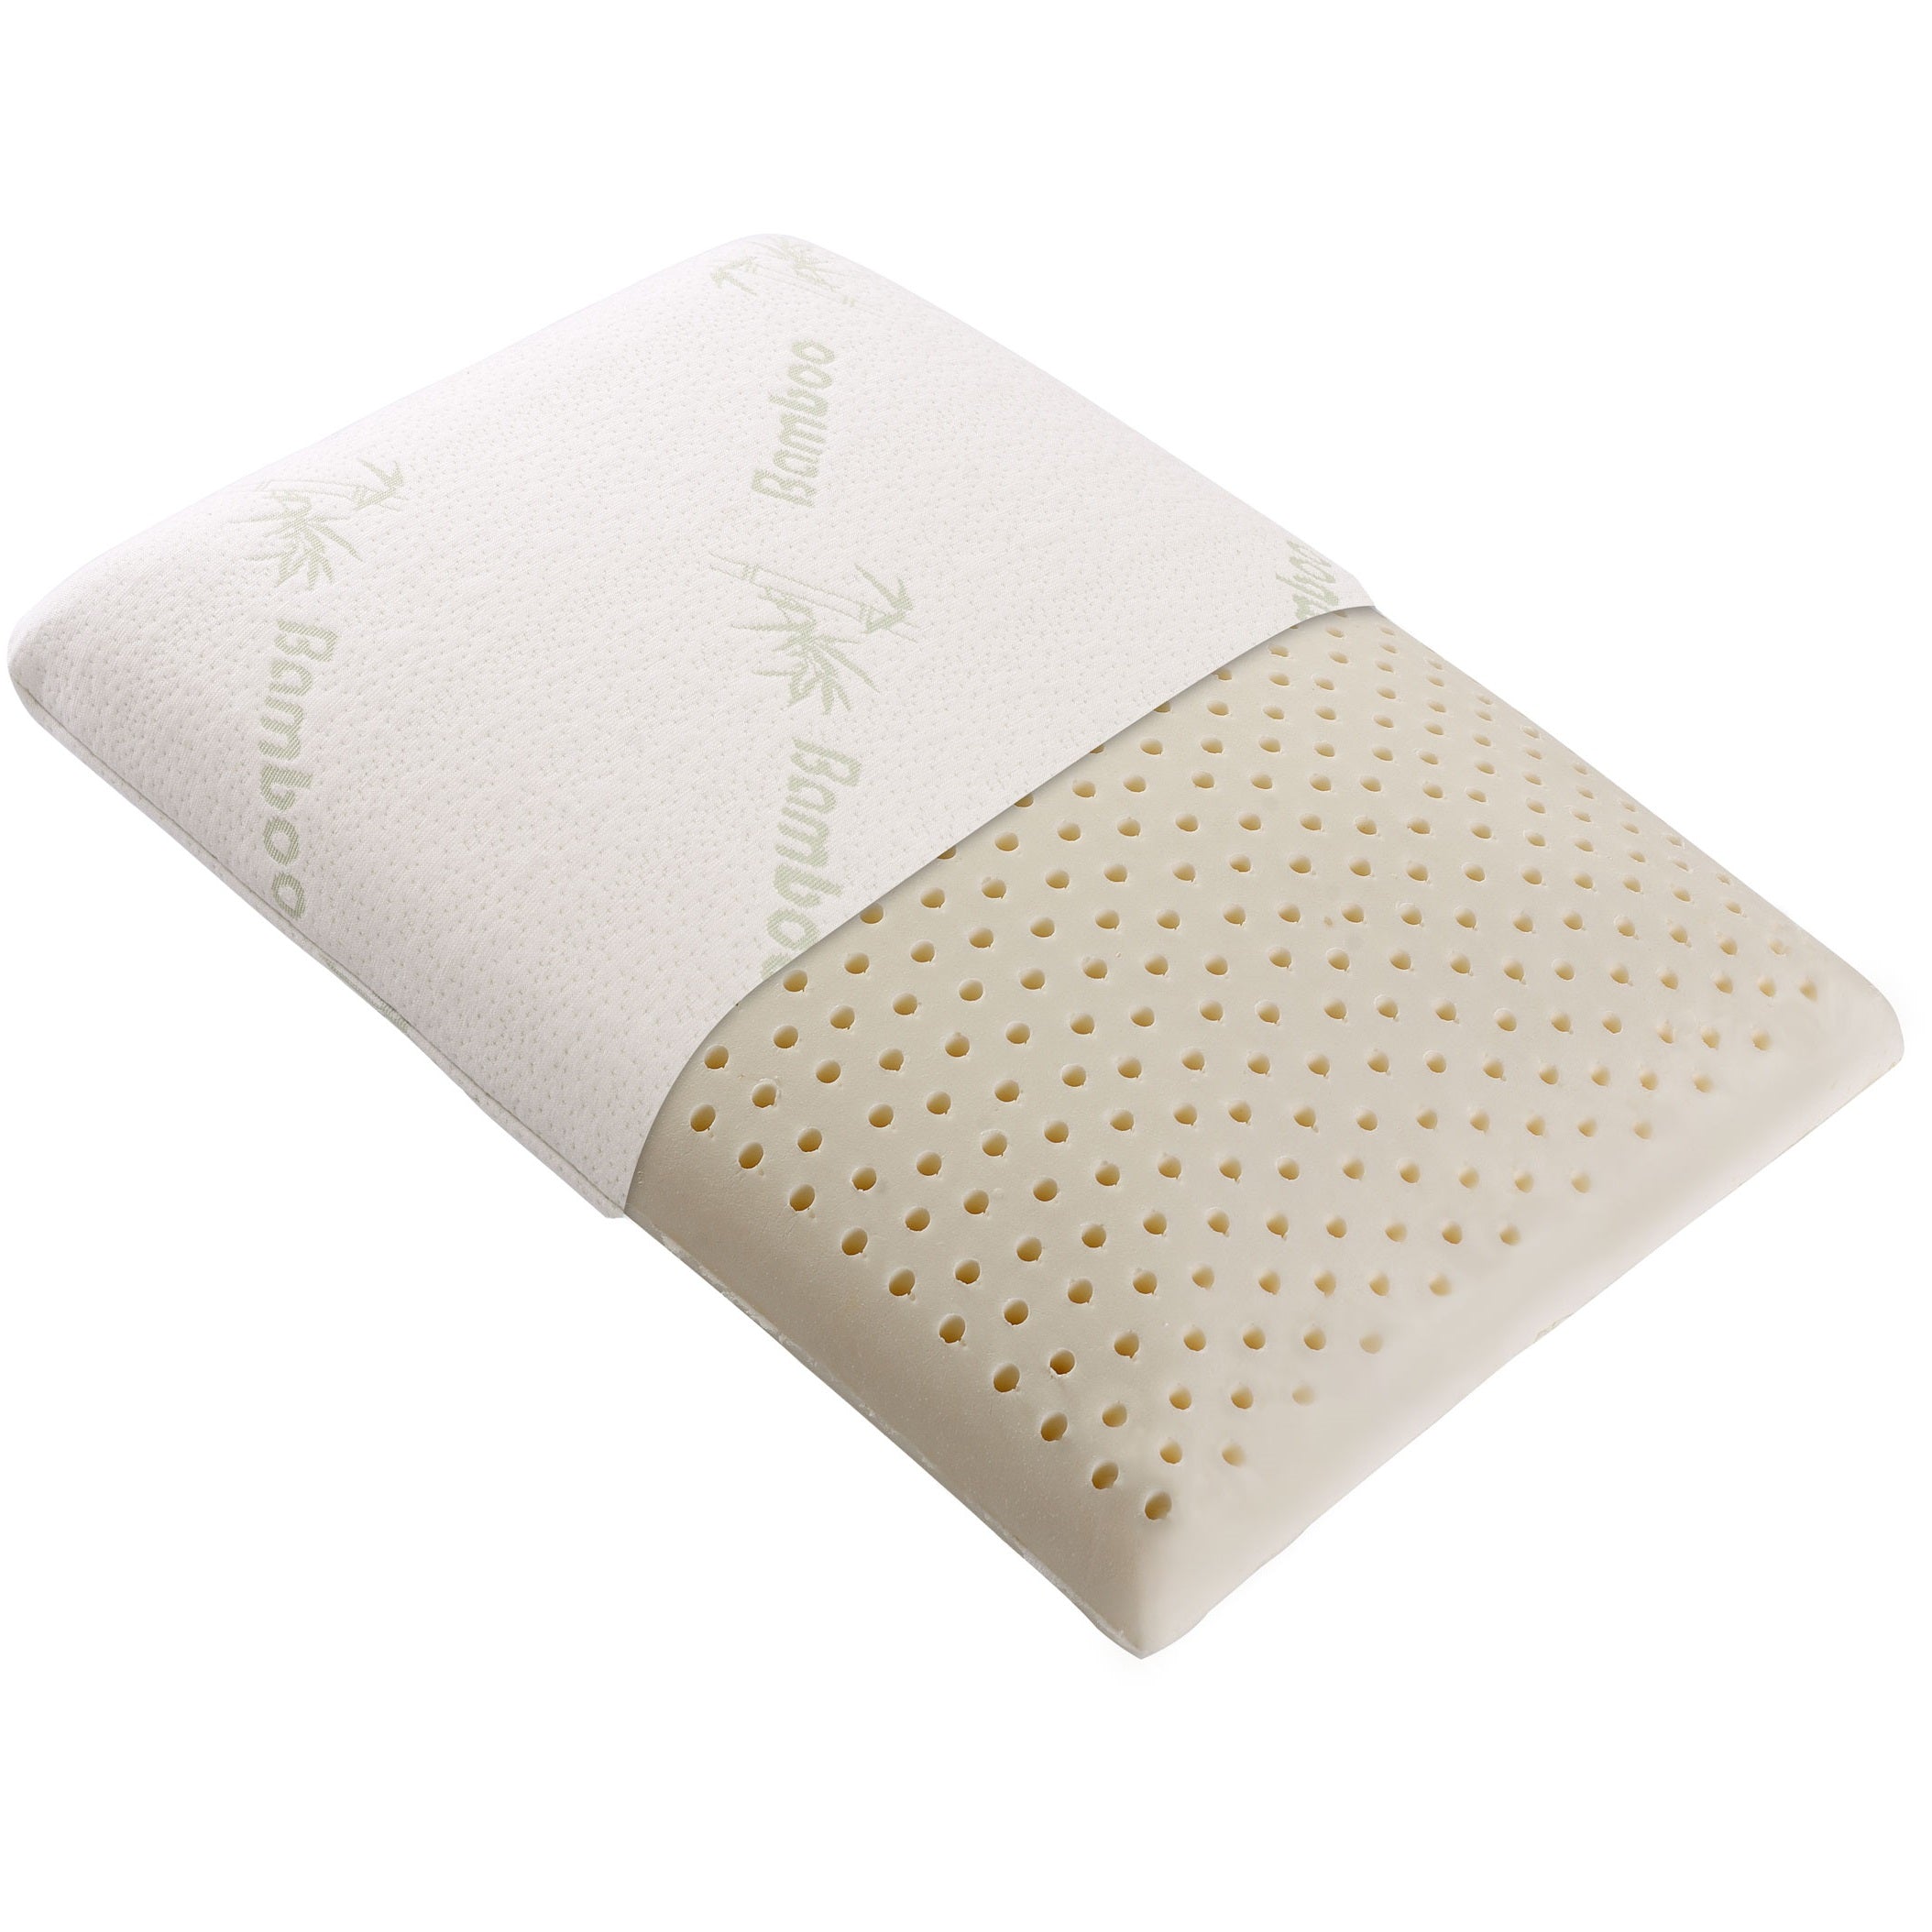 https://cdn.shopify.com/s/files/1/2091/6511/products/cheer-collection-latex-memory-foam-pillow-466762.jpg?v=1671779986